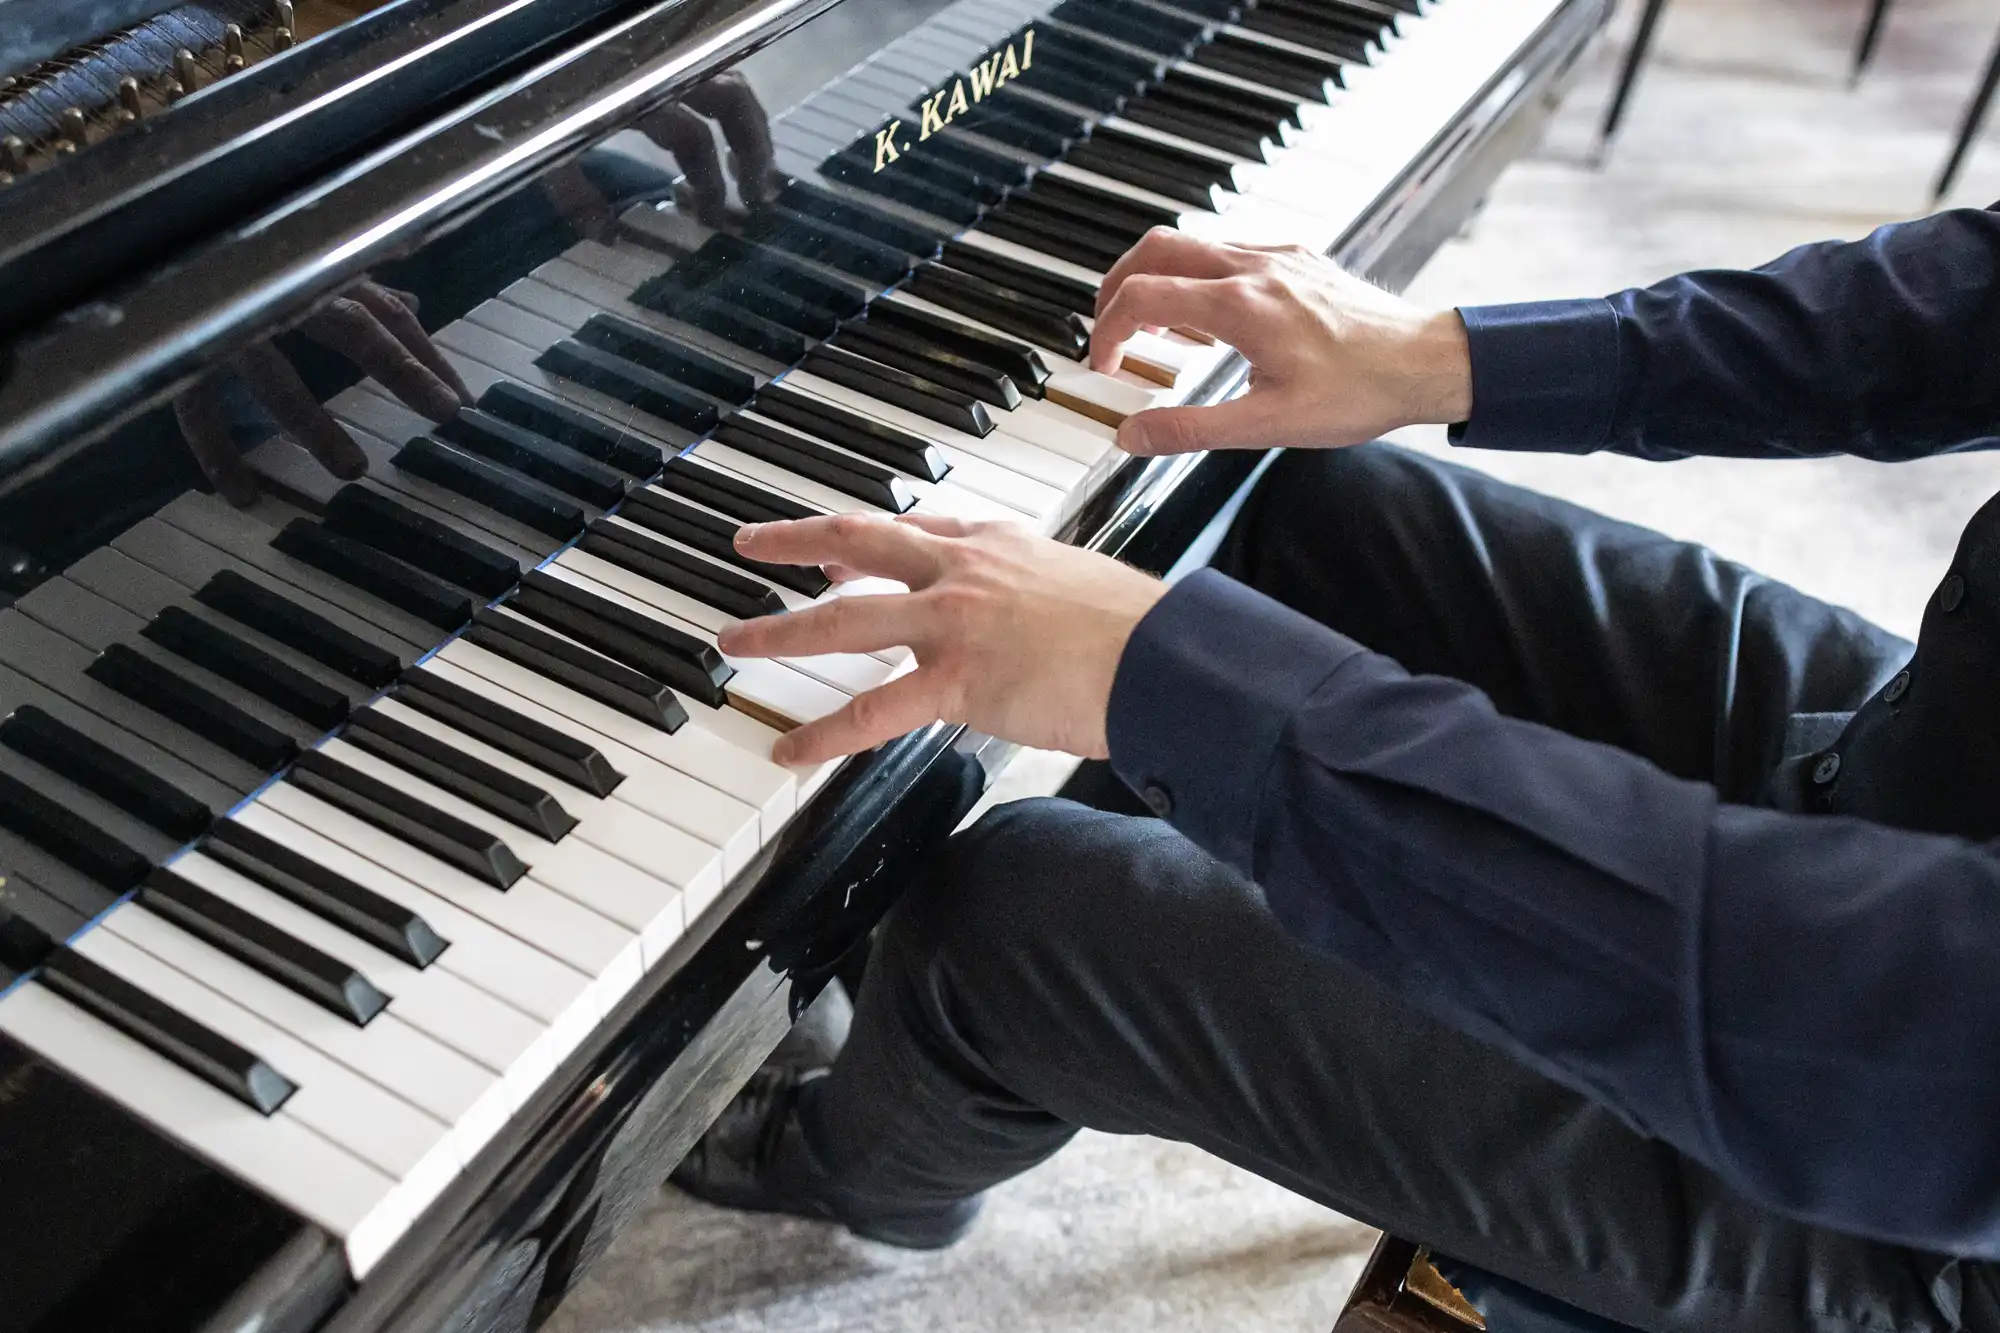 A person playing a Kawai grand piano, focusing on their hands as they press the black and white keys.